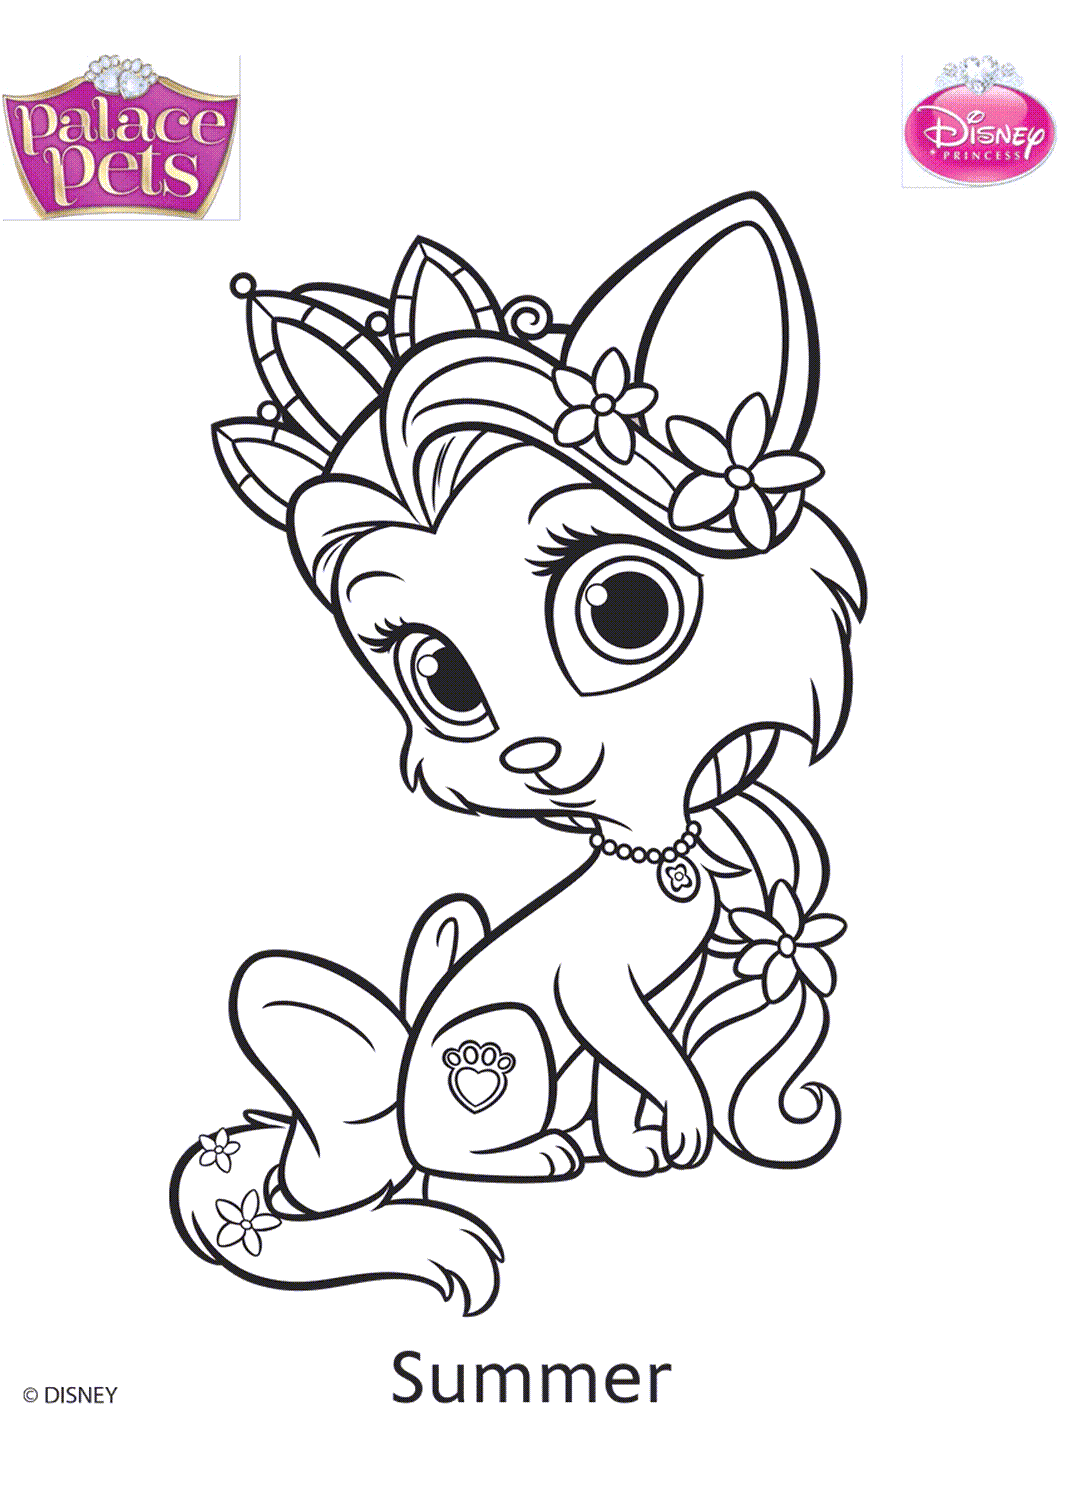 palace pets coloring pages free